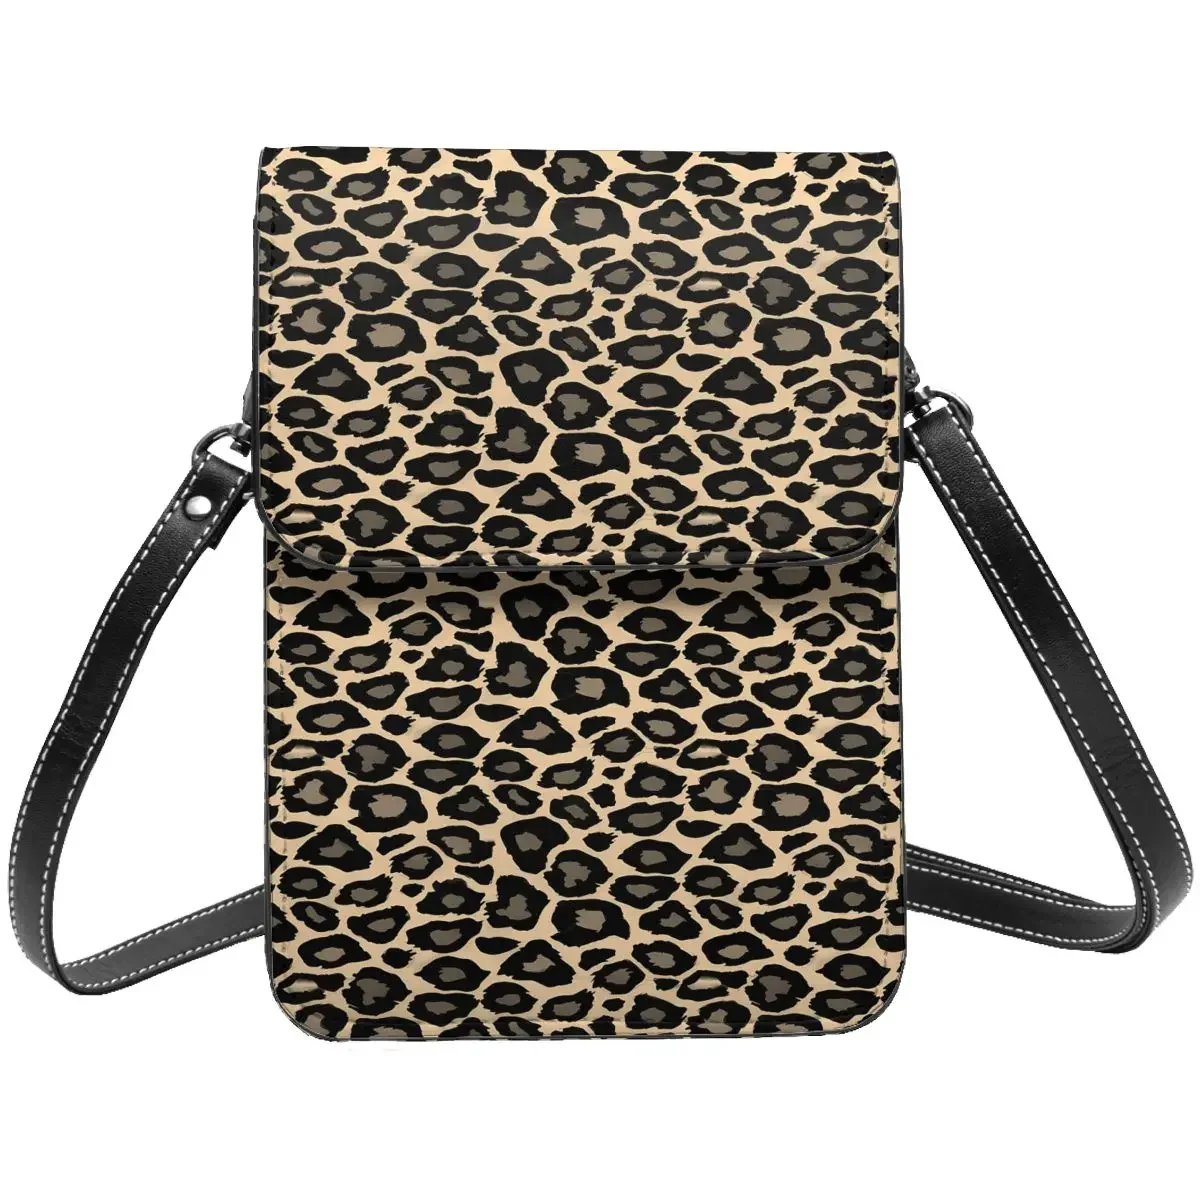 

Funky Leopard Print Shoulder Bag Black and Tan Retro Leather Shopping Mobile Phone Bag Female Gifts Bags